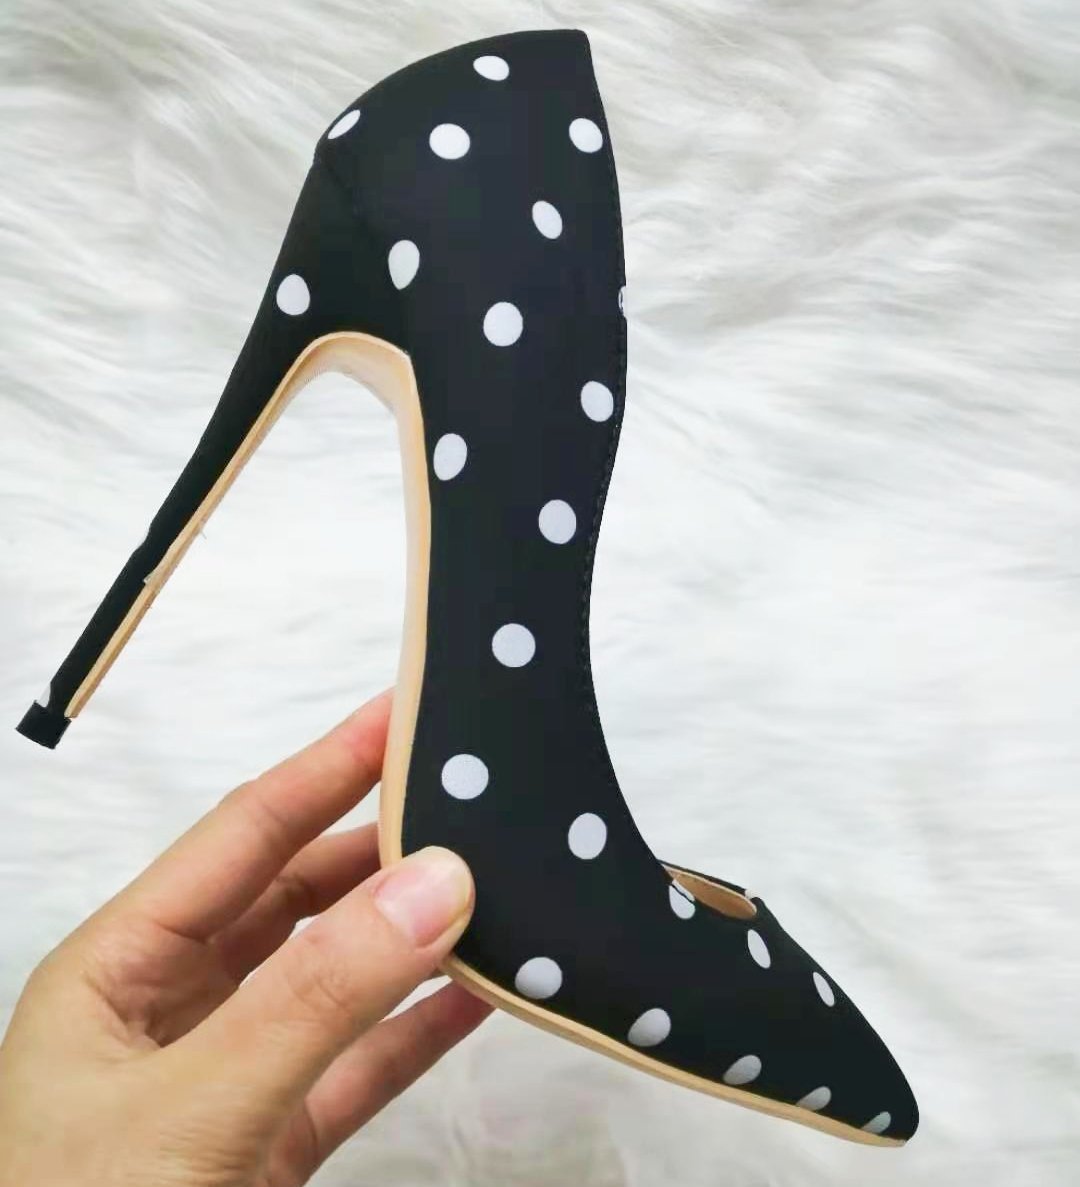 High-heels with polka dot pattern, Fashion Evening Party Shoes, yy28